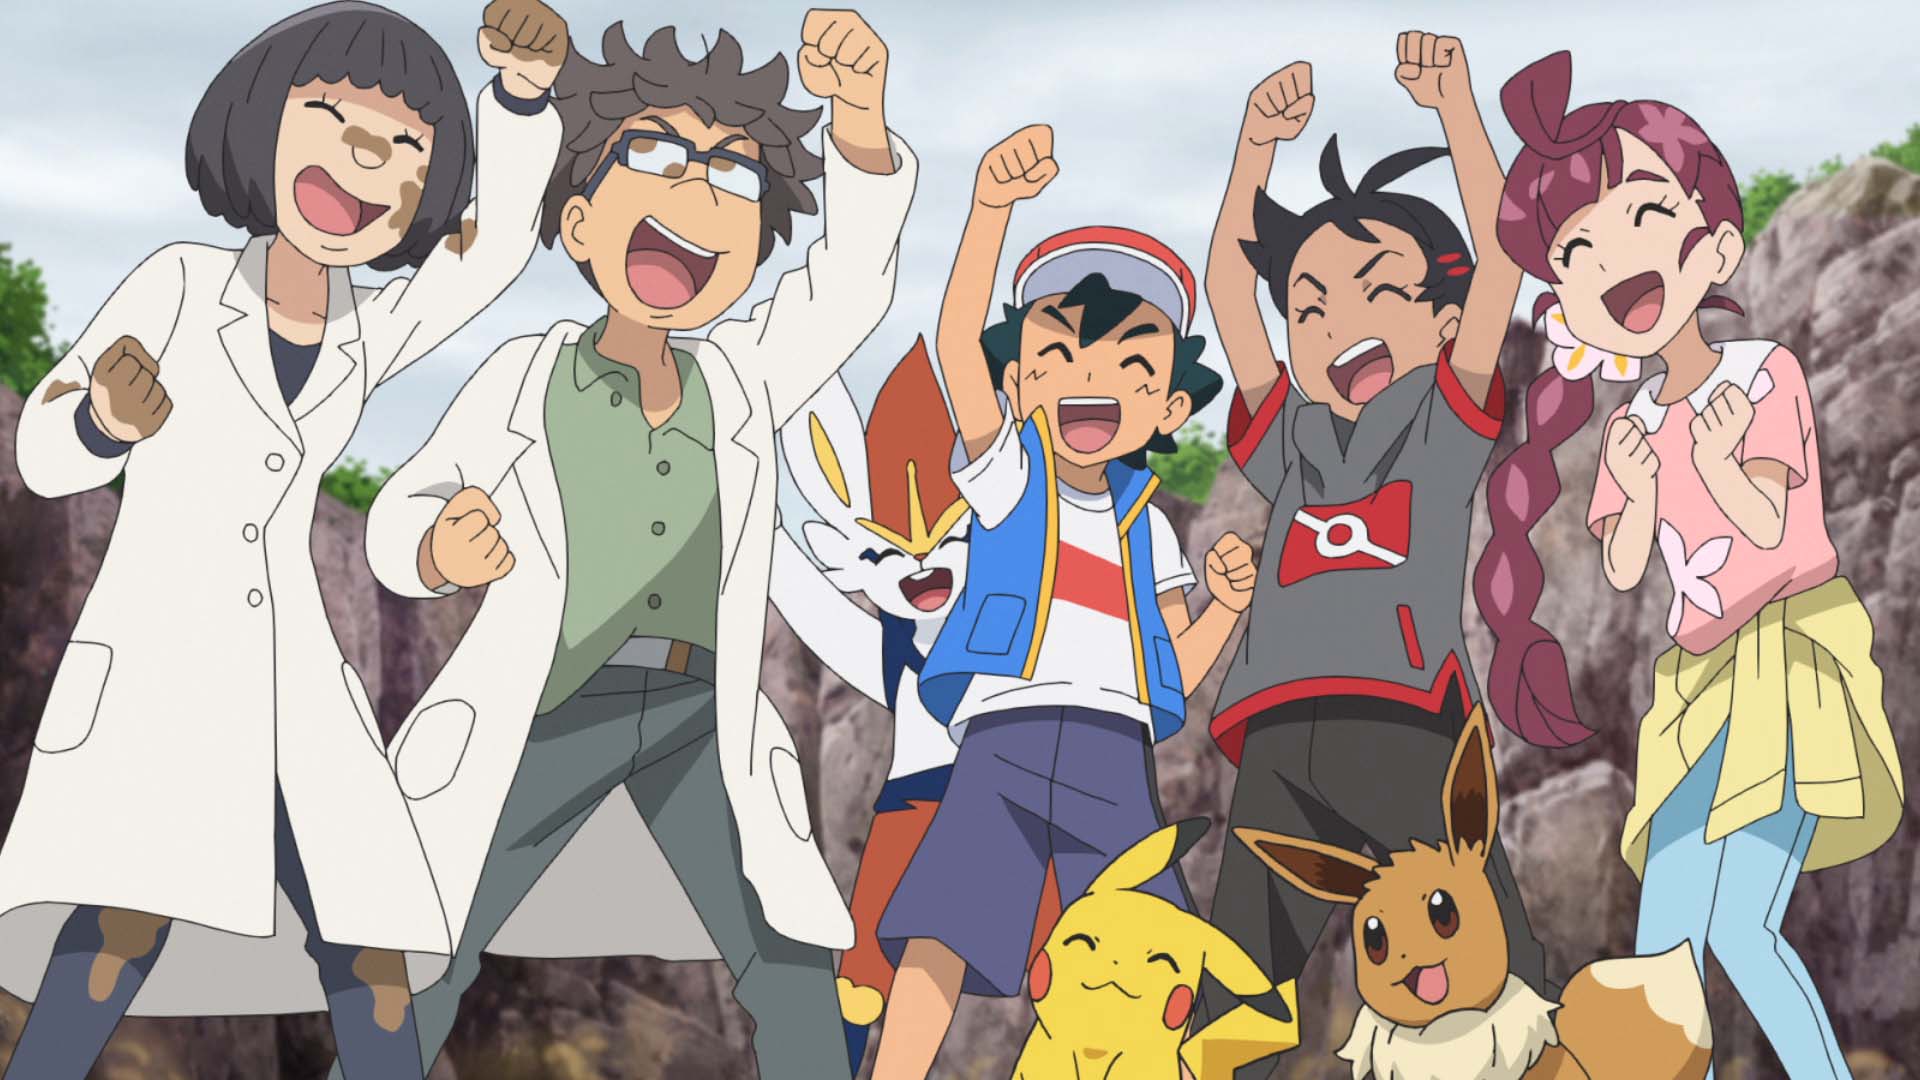 Pokémon Master Journeys Has Come To New Streaming Services